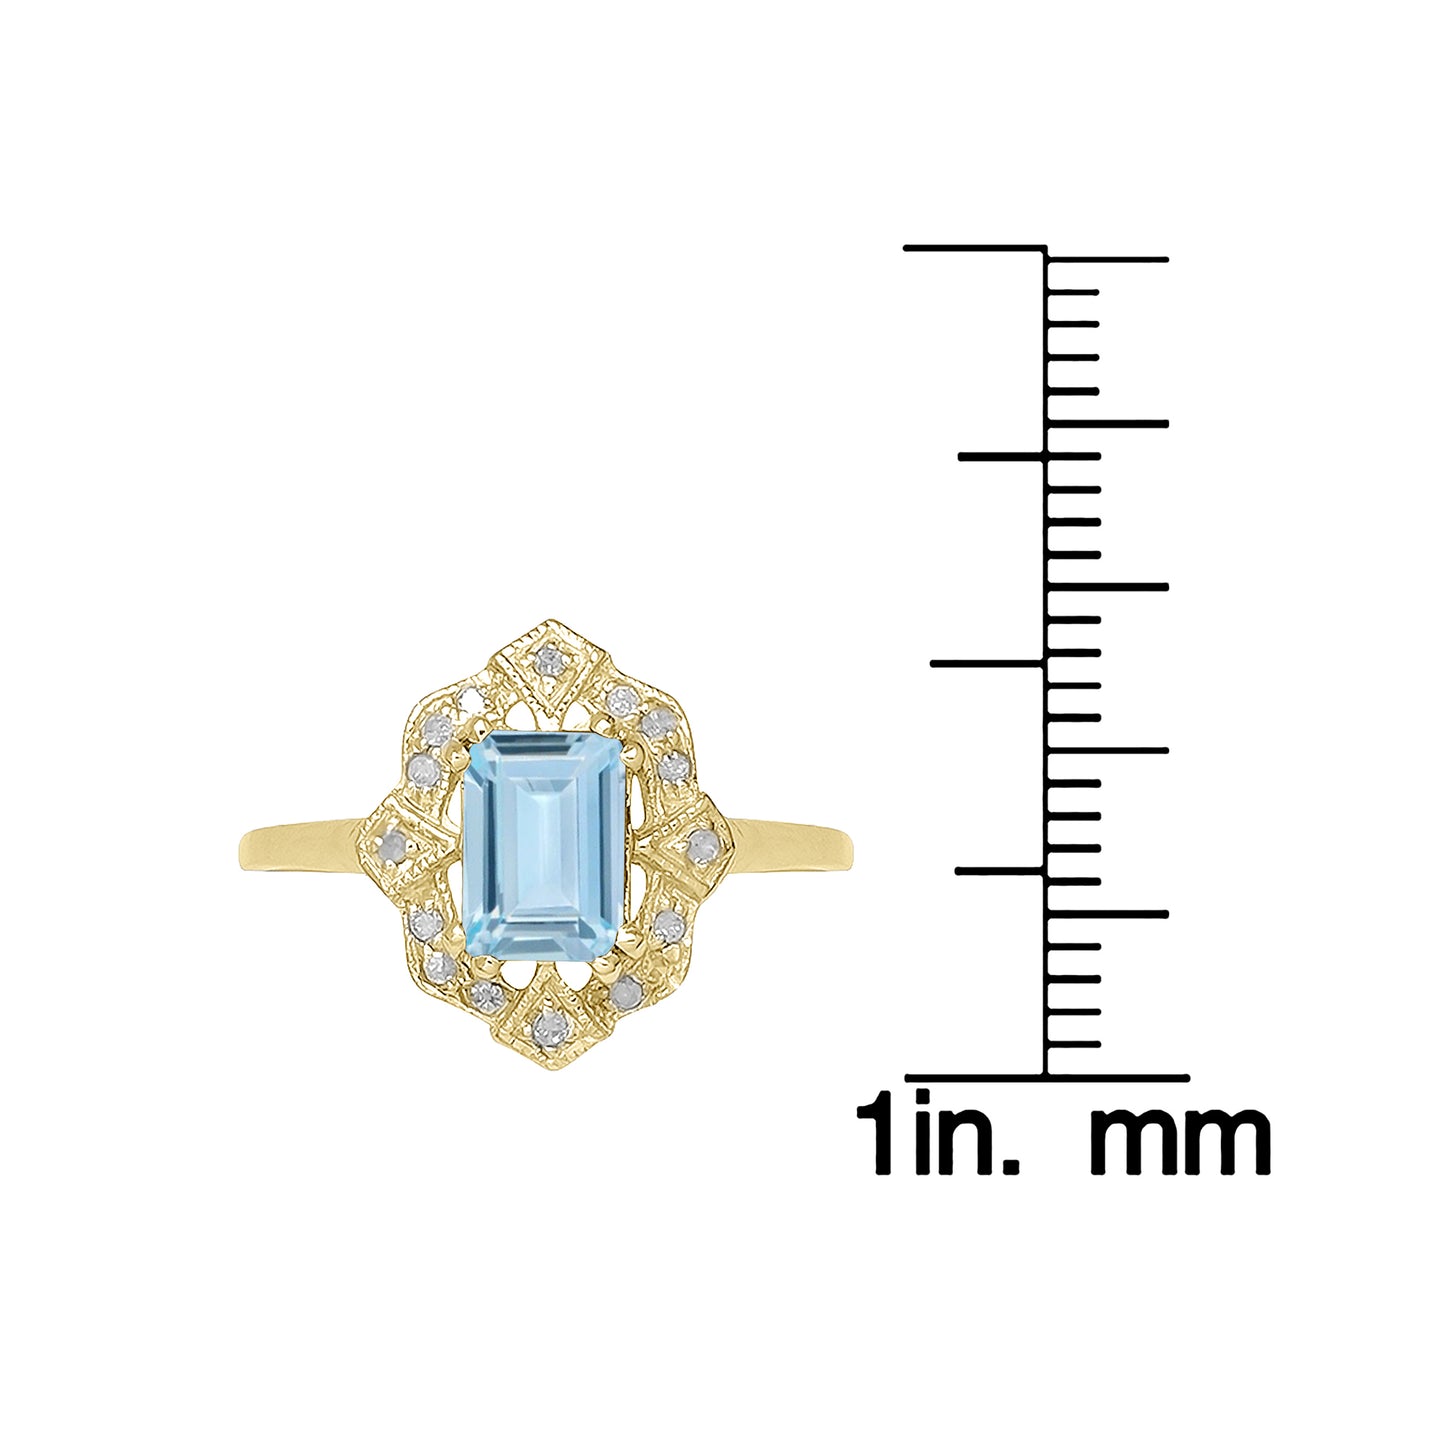 10k Yellow Gold Vintage Style Genuine Emerald-Cut Aquamarine and Diamond Accent Ring